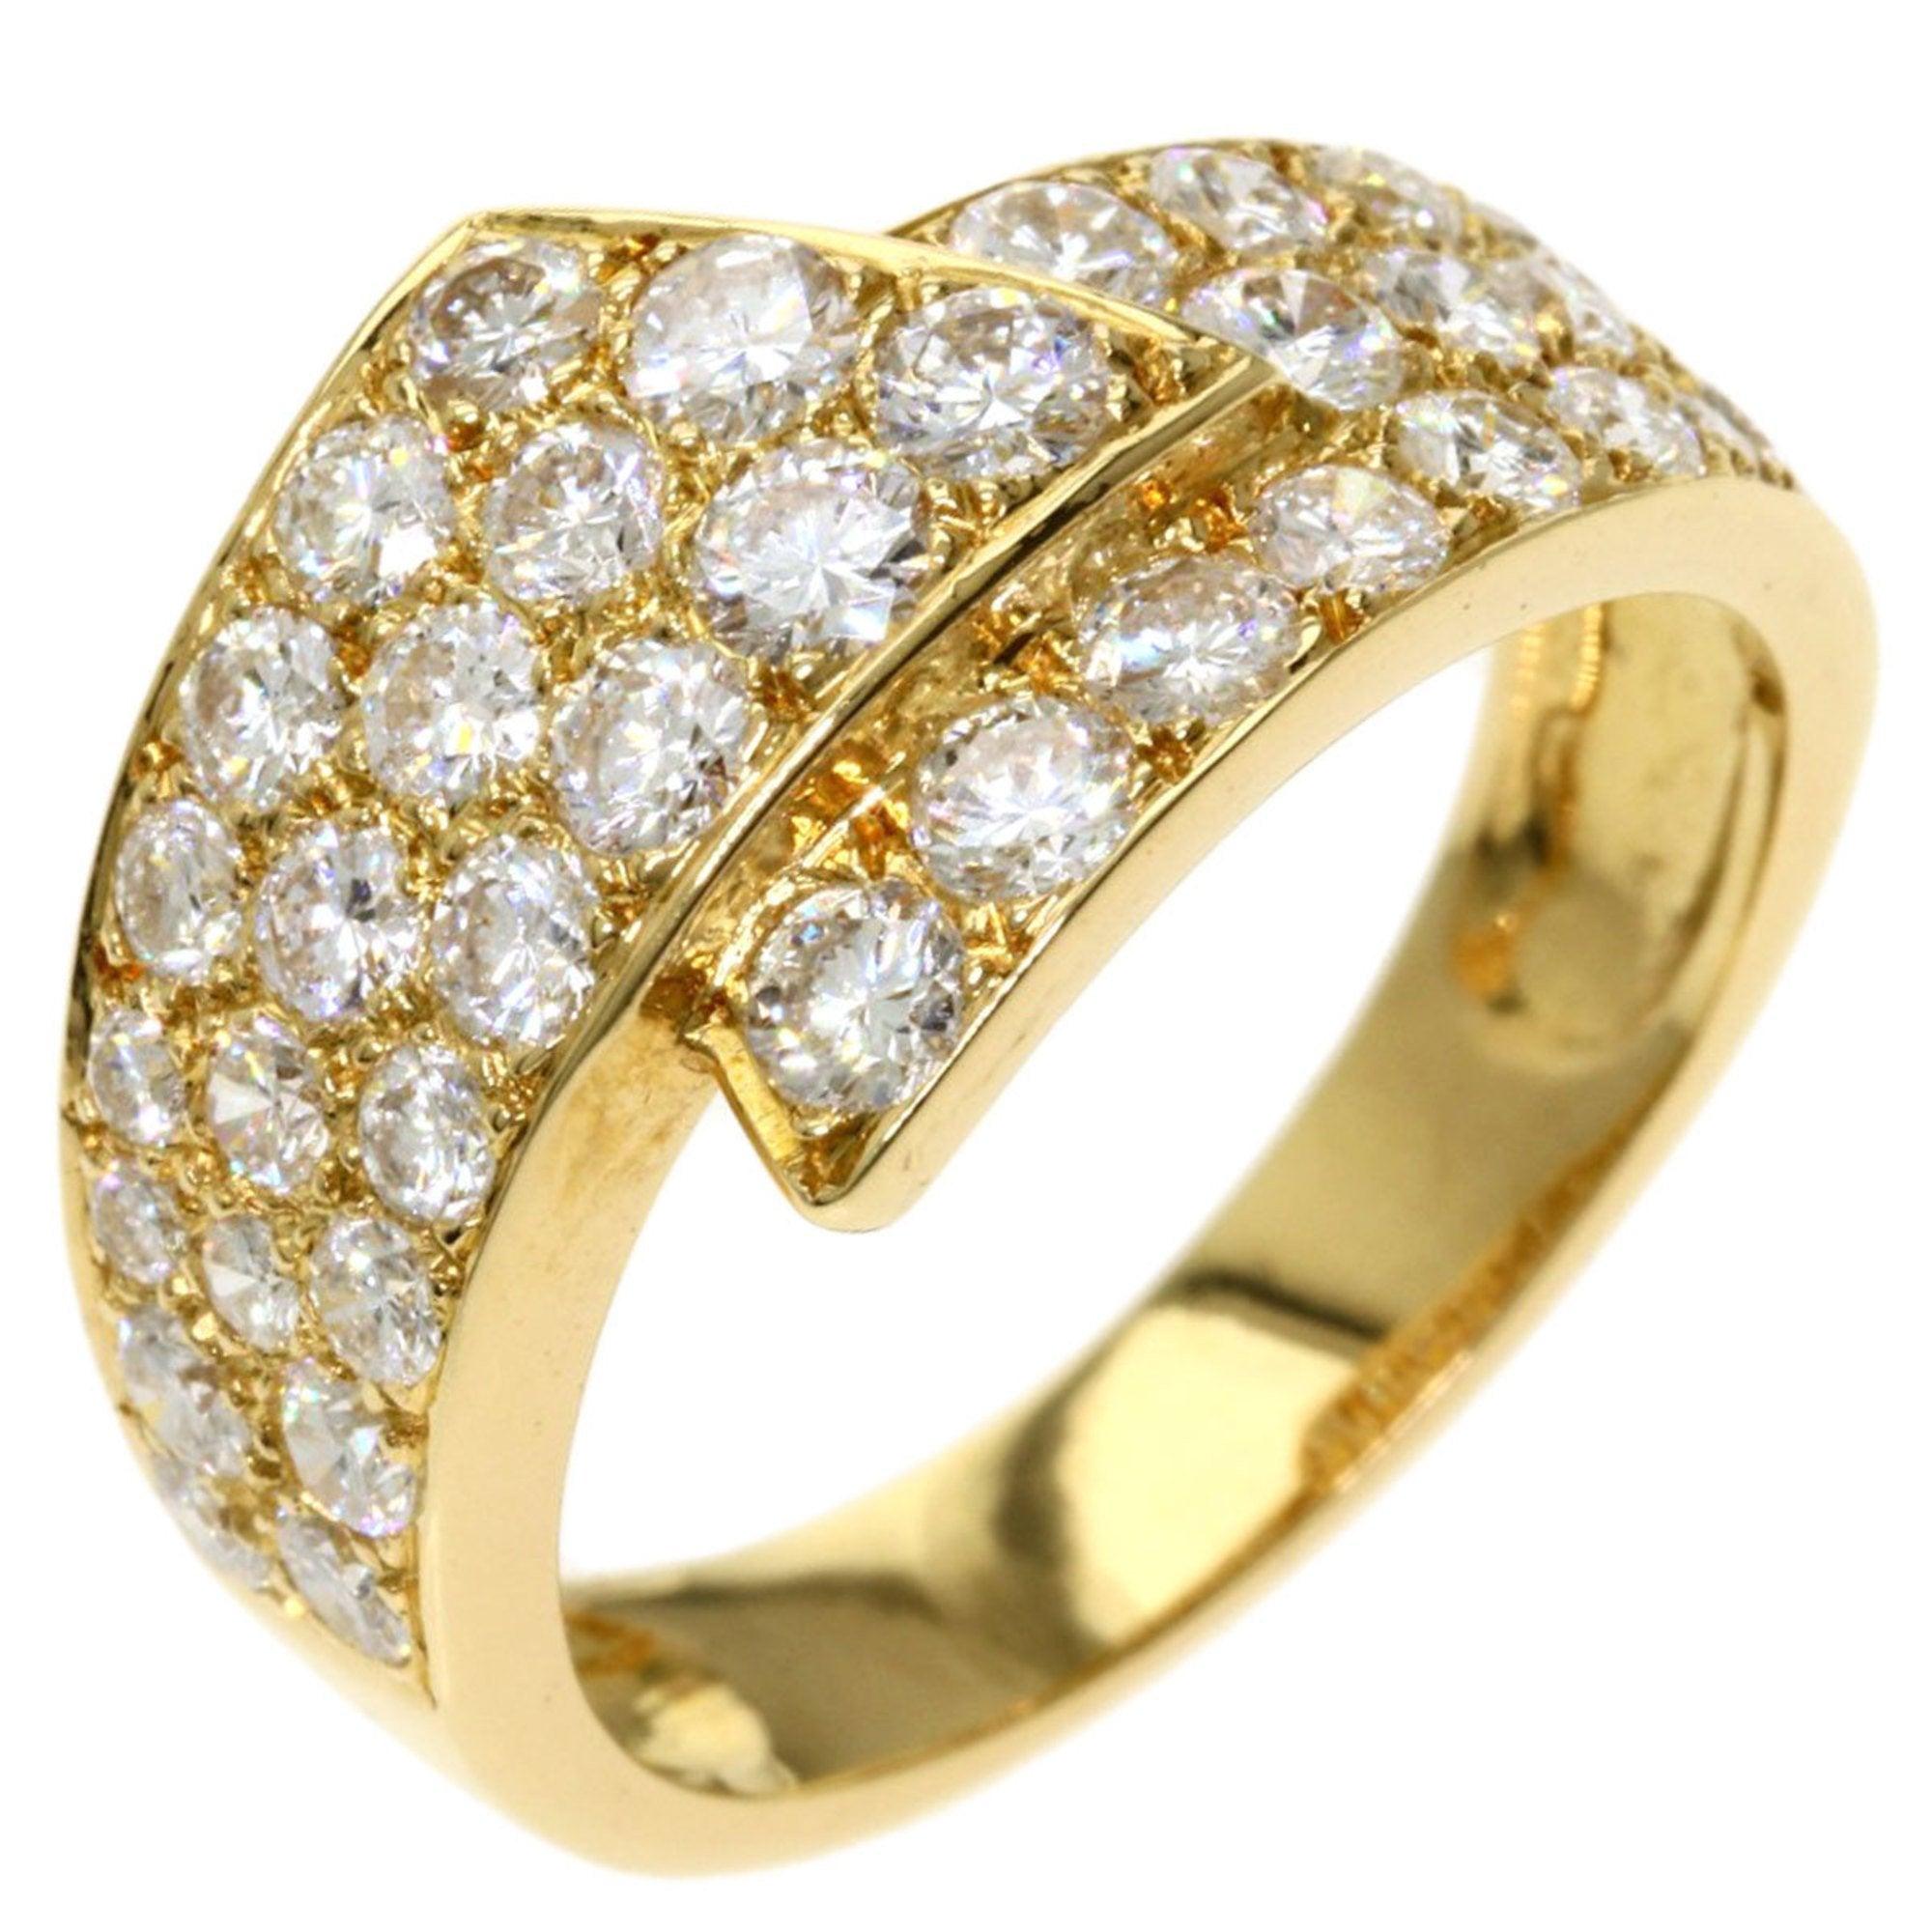 Van Cleef & Arpels Diamond Rings in 18K Yellow Gold 

Additional information:
Brand: Van Cleef & Arpels
Gender: Women
Gemstone: Diamond
Material: Yellow gold (18K)
Ring size (US): 6.5
Condition: Good
Condition details: The item has been used and has